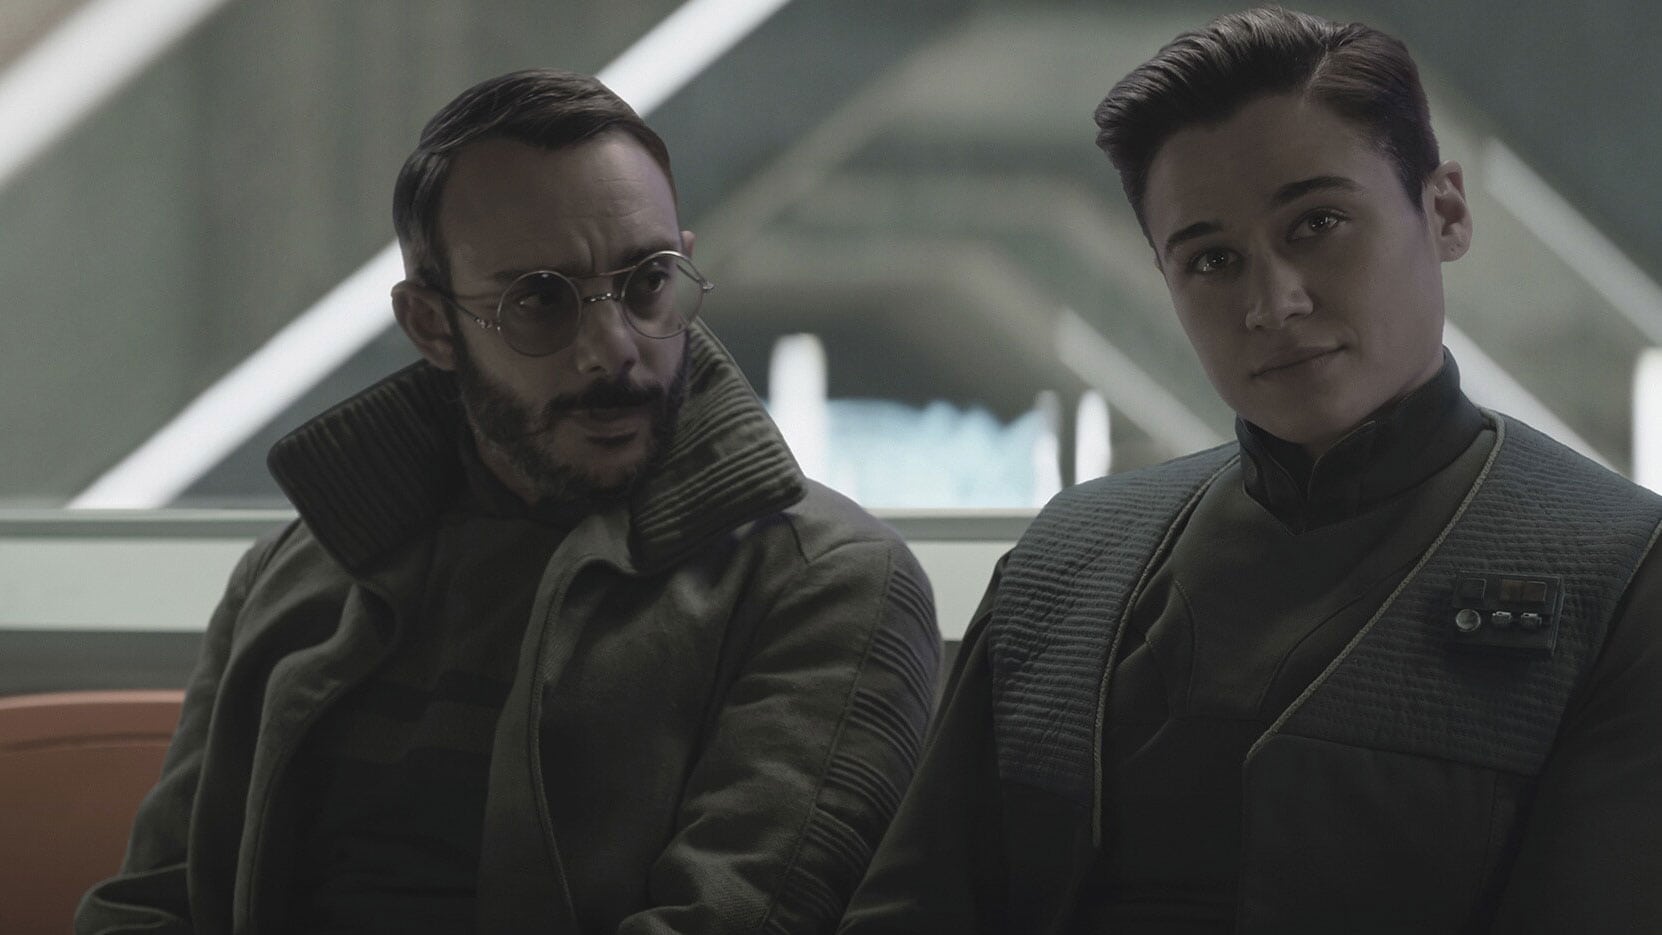 Dr. Pershing (Omid Abtahi) and Elia Kane (Katy O'Brian) in The Mandalorian Chapter 19: The Convert - Lucasfilm Ltd.